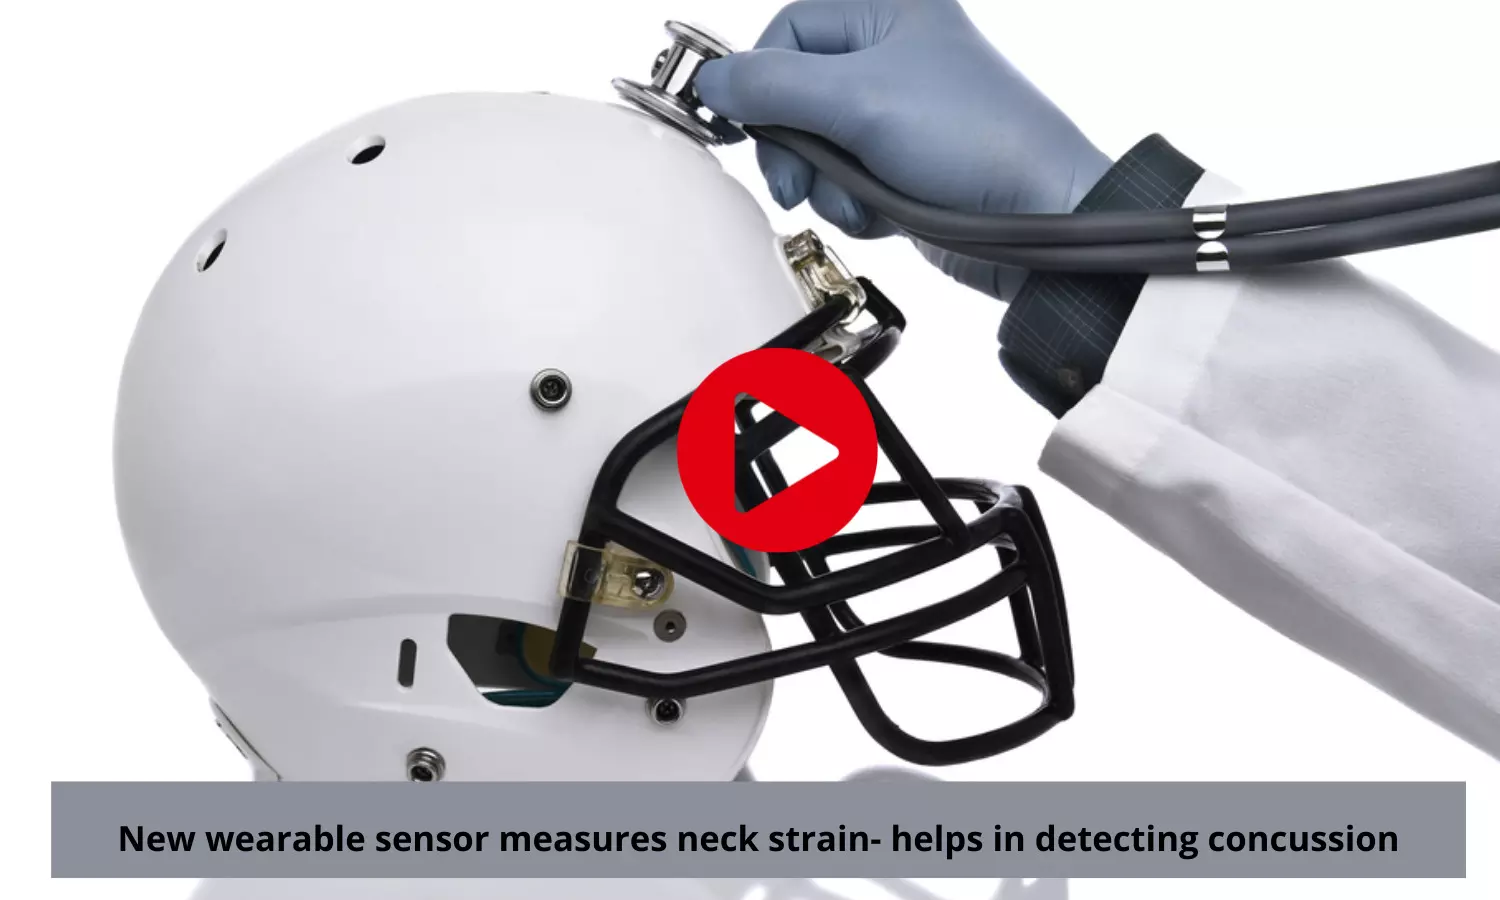 New wearable sensor measures neck strain- helps in detecting concussion